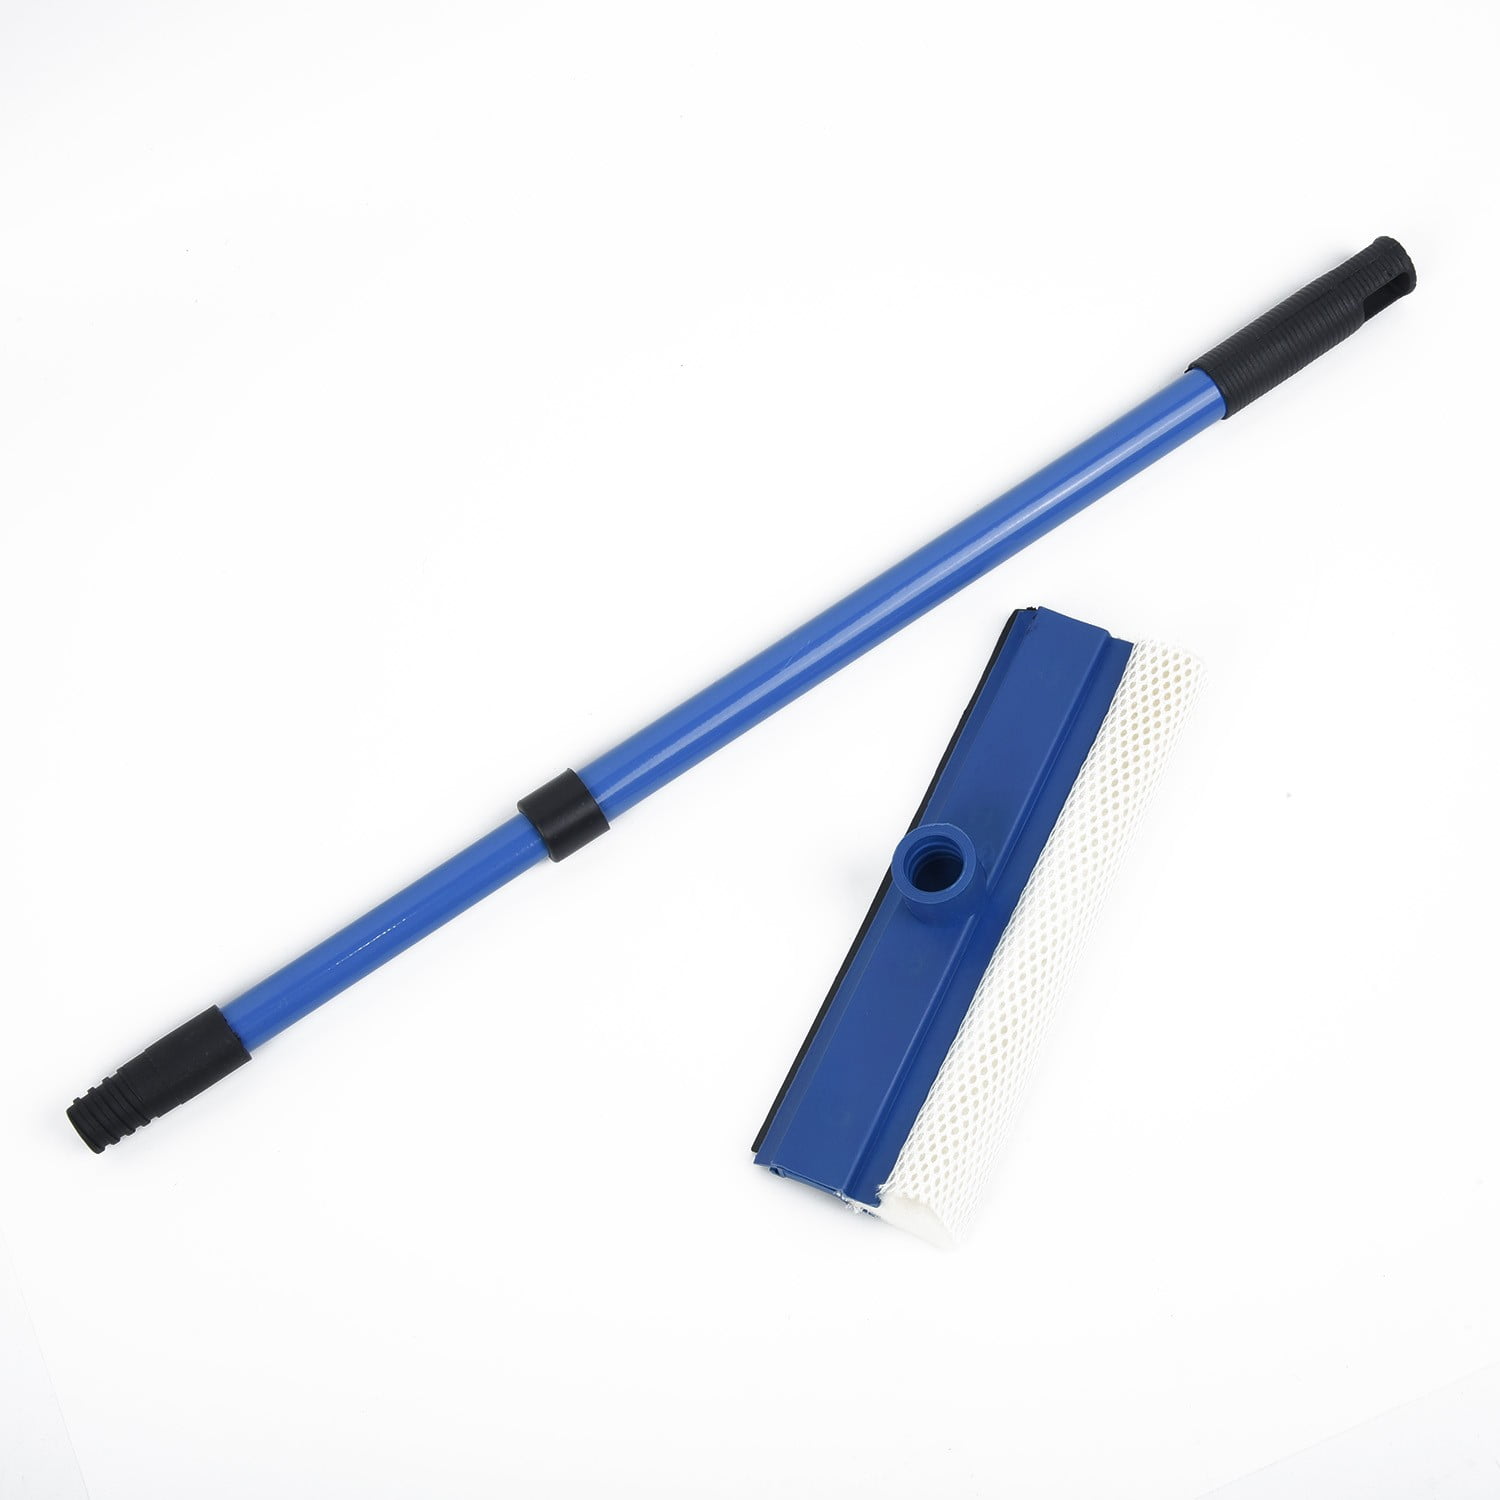 Portable Telescopic Window Cleaning Applicator Brush With Extendable Handle  For Car Side Mirror And Rainy Glass From Smyy666, $3.27